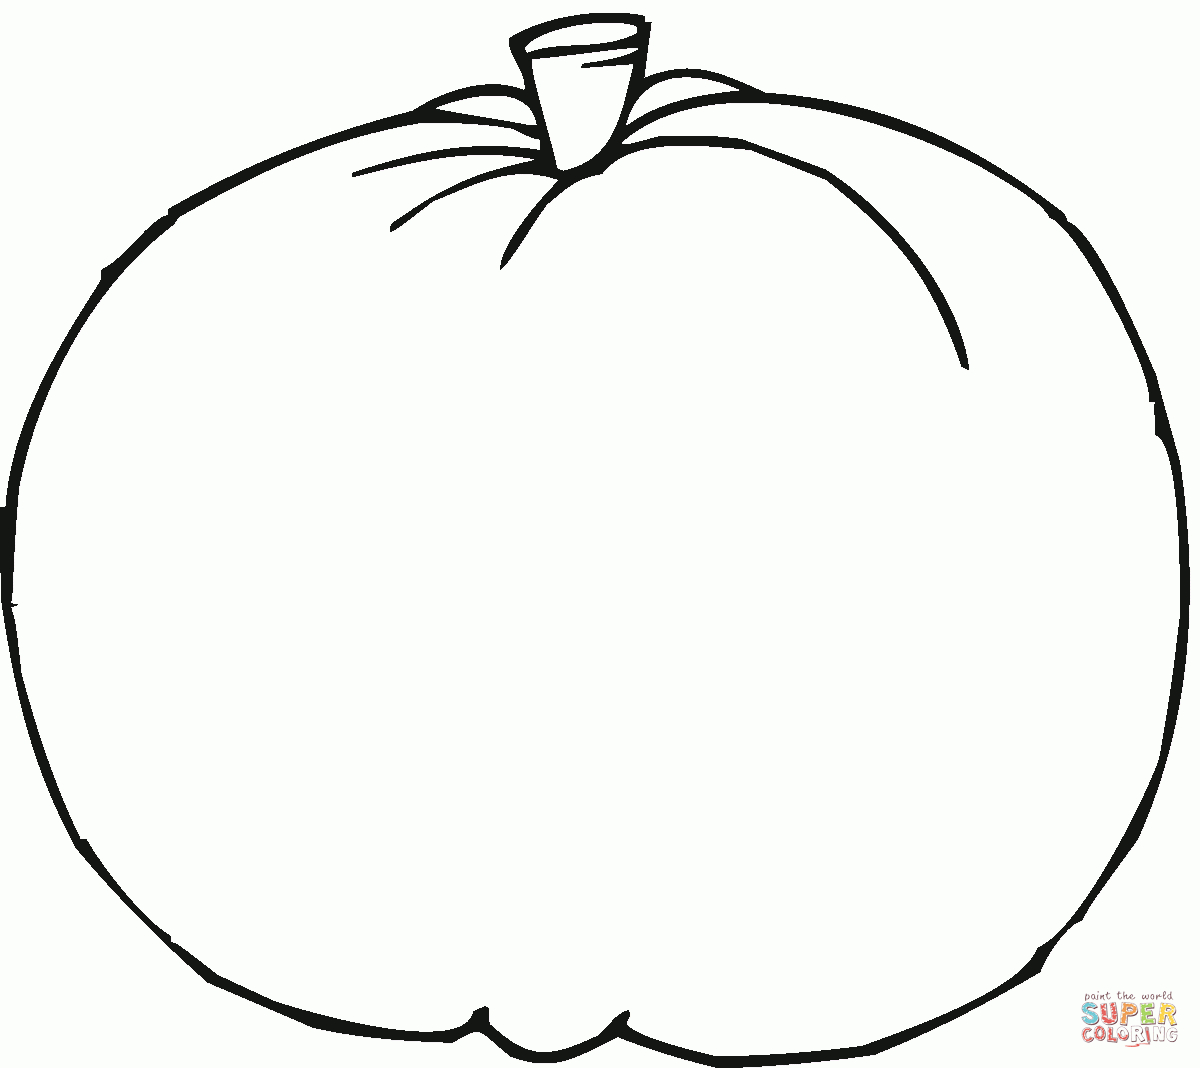 Pumpkins Coloring Pages | Free Coloring Pages - Free Printable Pumpkin Coloring Pages